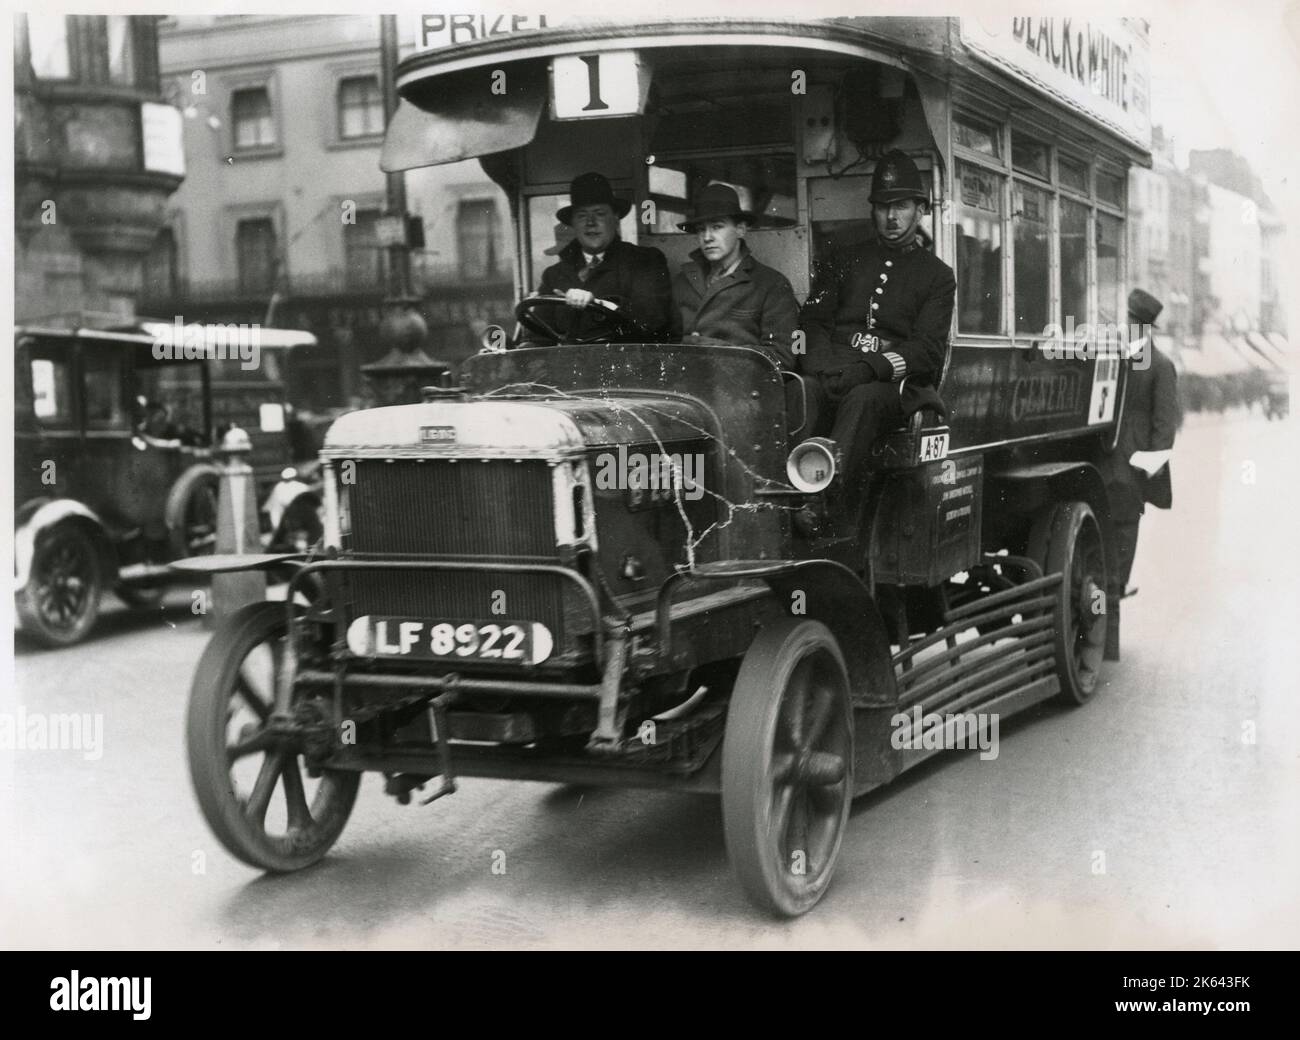 General Strike - Policeman riding with volunteer bus drivers. The barbed wire on the bonnet is to stop protestors damaging the engine. The strike lasted 9 days between 4th and 12th May, 1926.     Date: 1926 Stock Photo